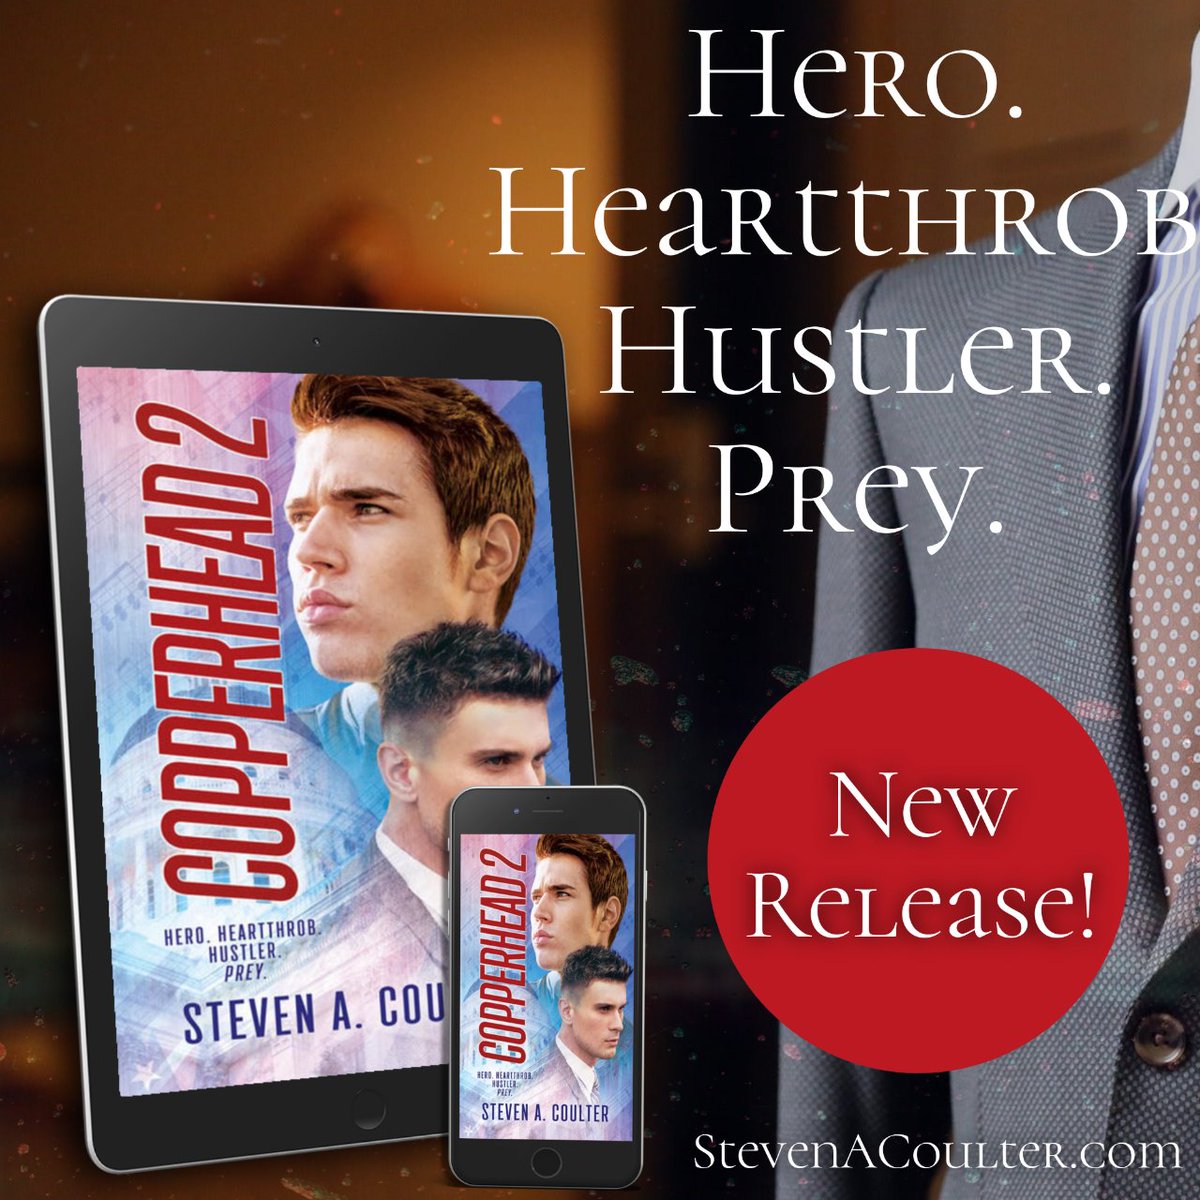 📘 Dive into the gripping sequel now! The journey continues, and Abel's story is more intense than ever. 🚀📖

🎤amazon.com/Copperhead2-He…
#NewRelease #OneClick #HeroHeartthrobHustlerPrey #Saga #SuspensefulSequel #ThrillerNovel #AbelTorres